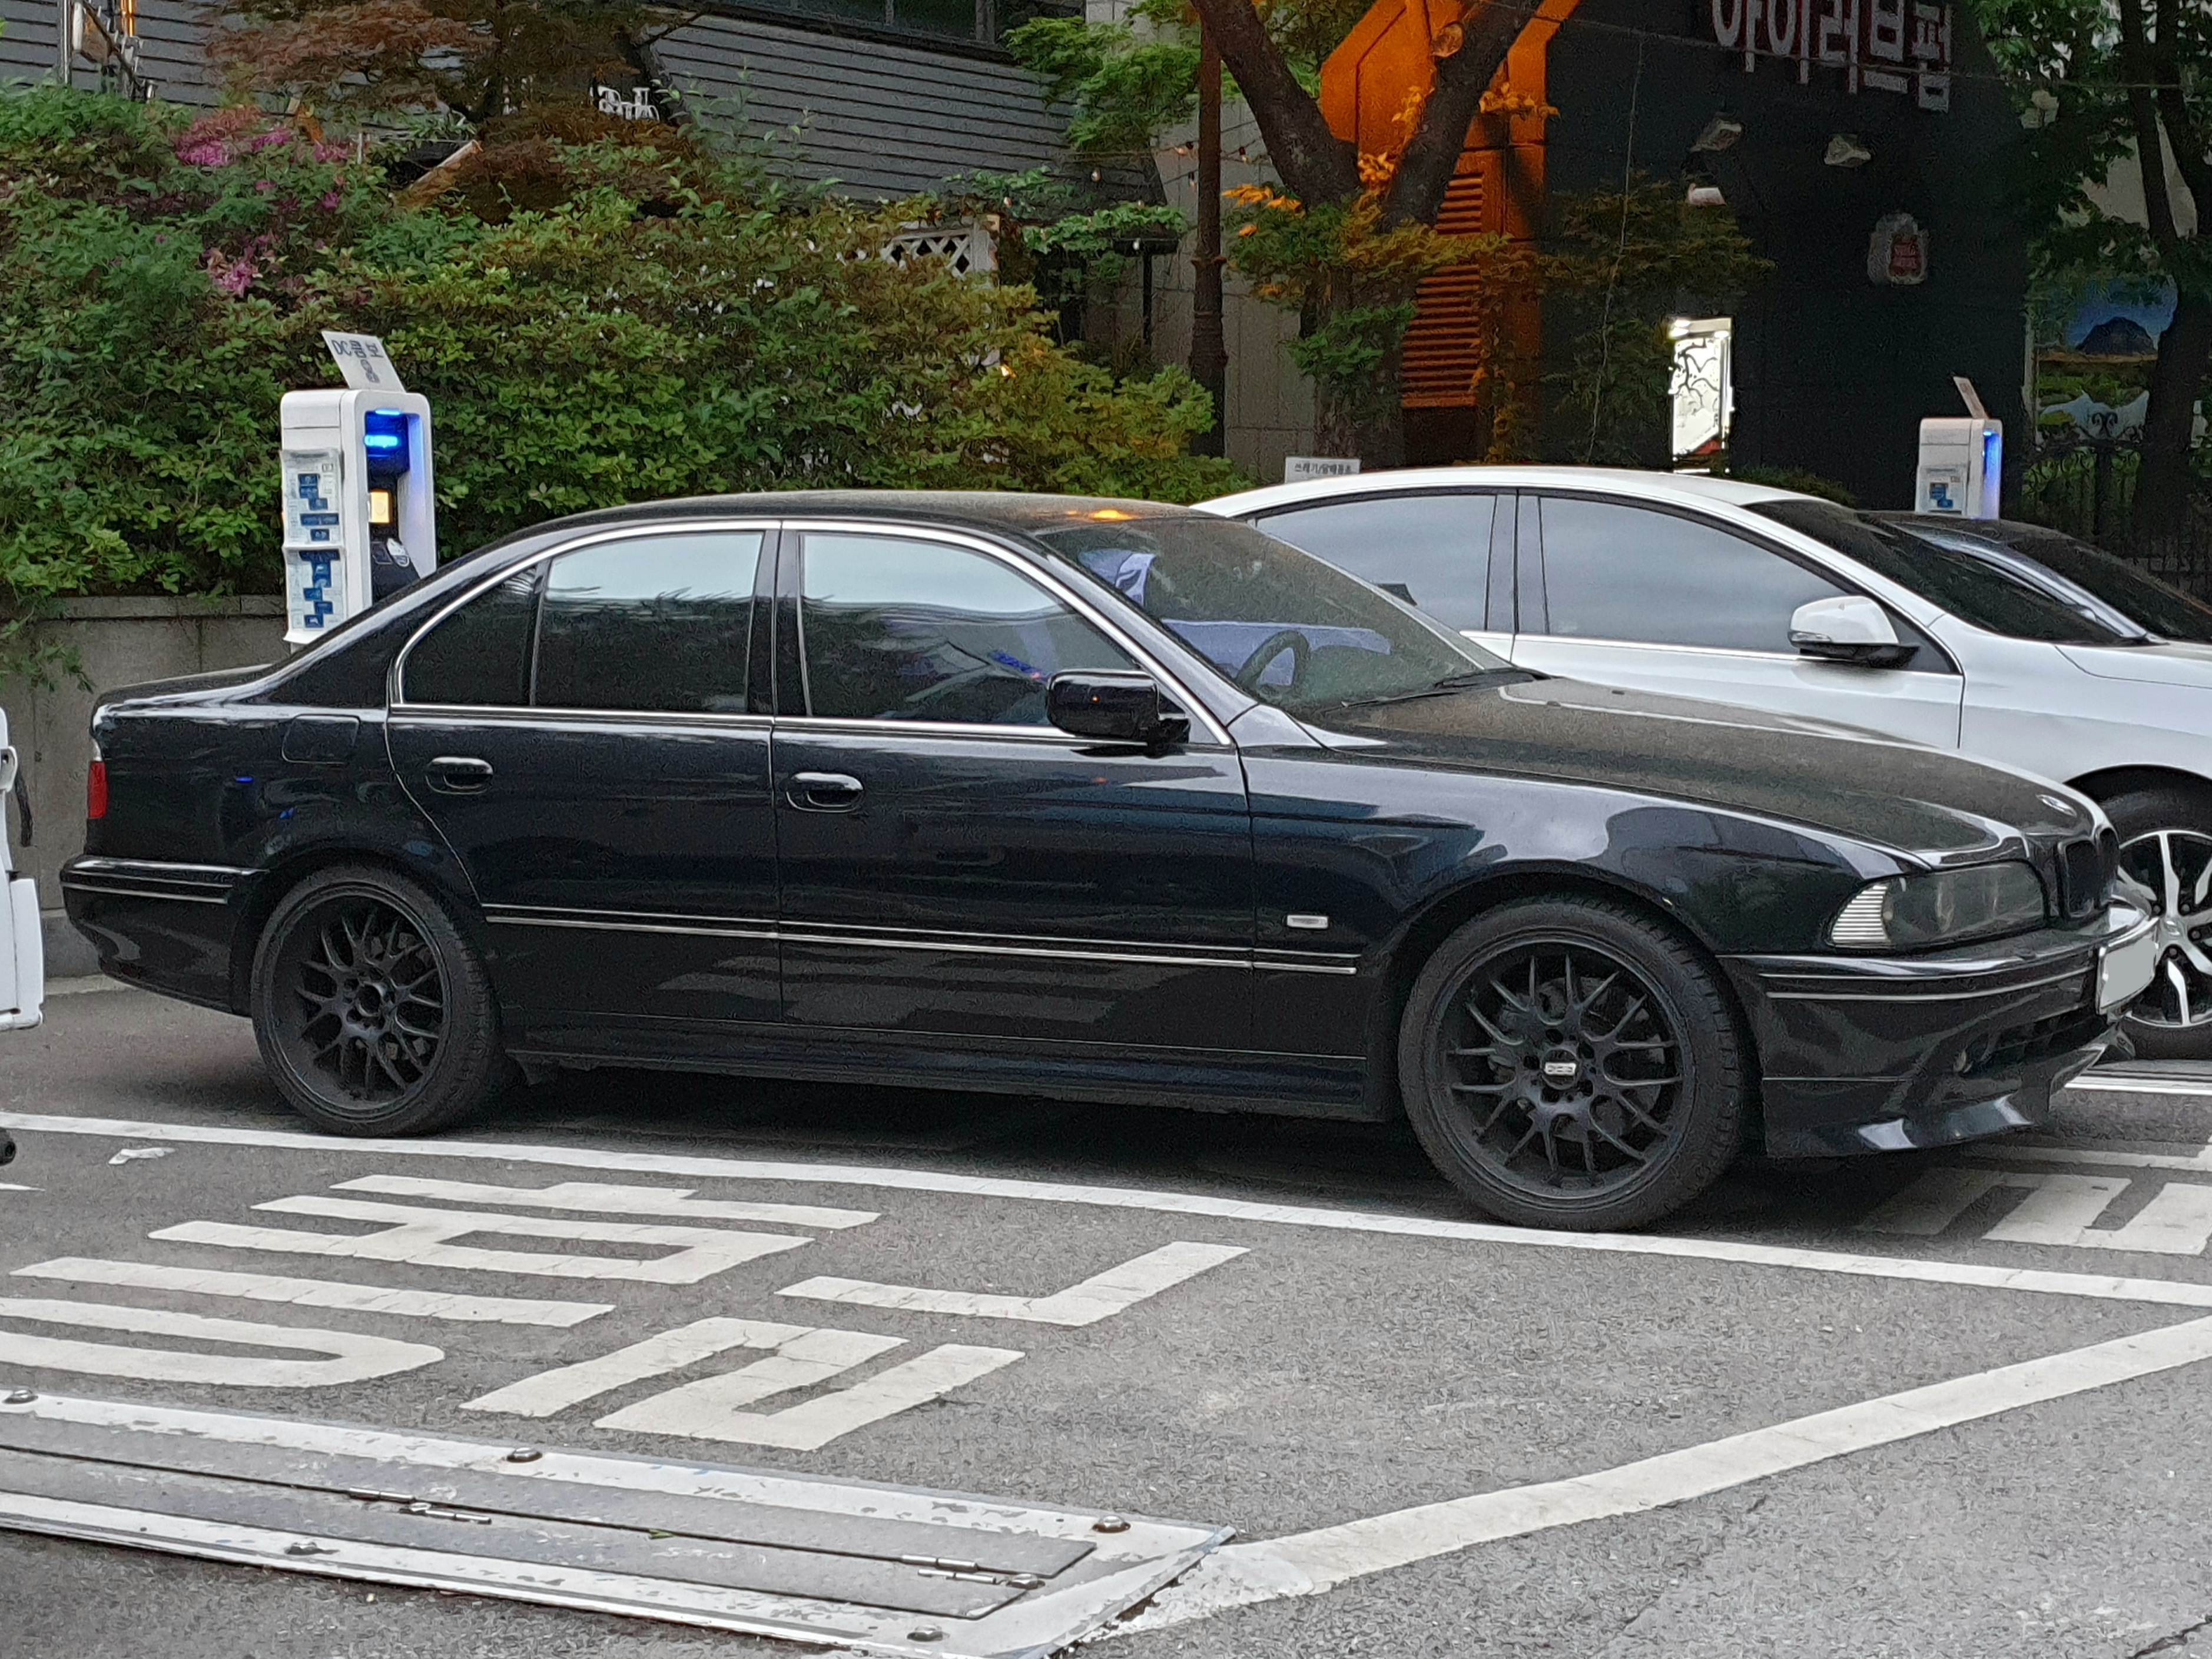 BMW E39 5 Series – The Time Is Now